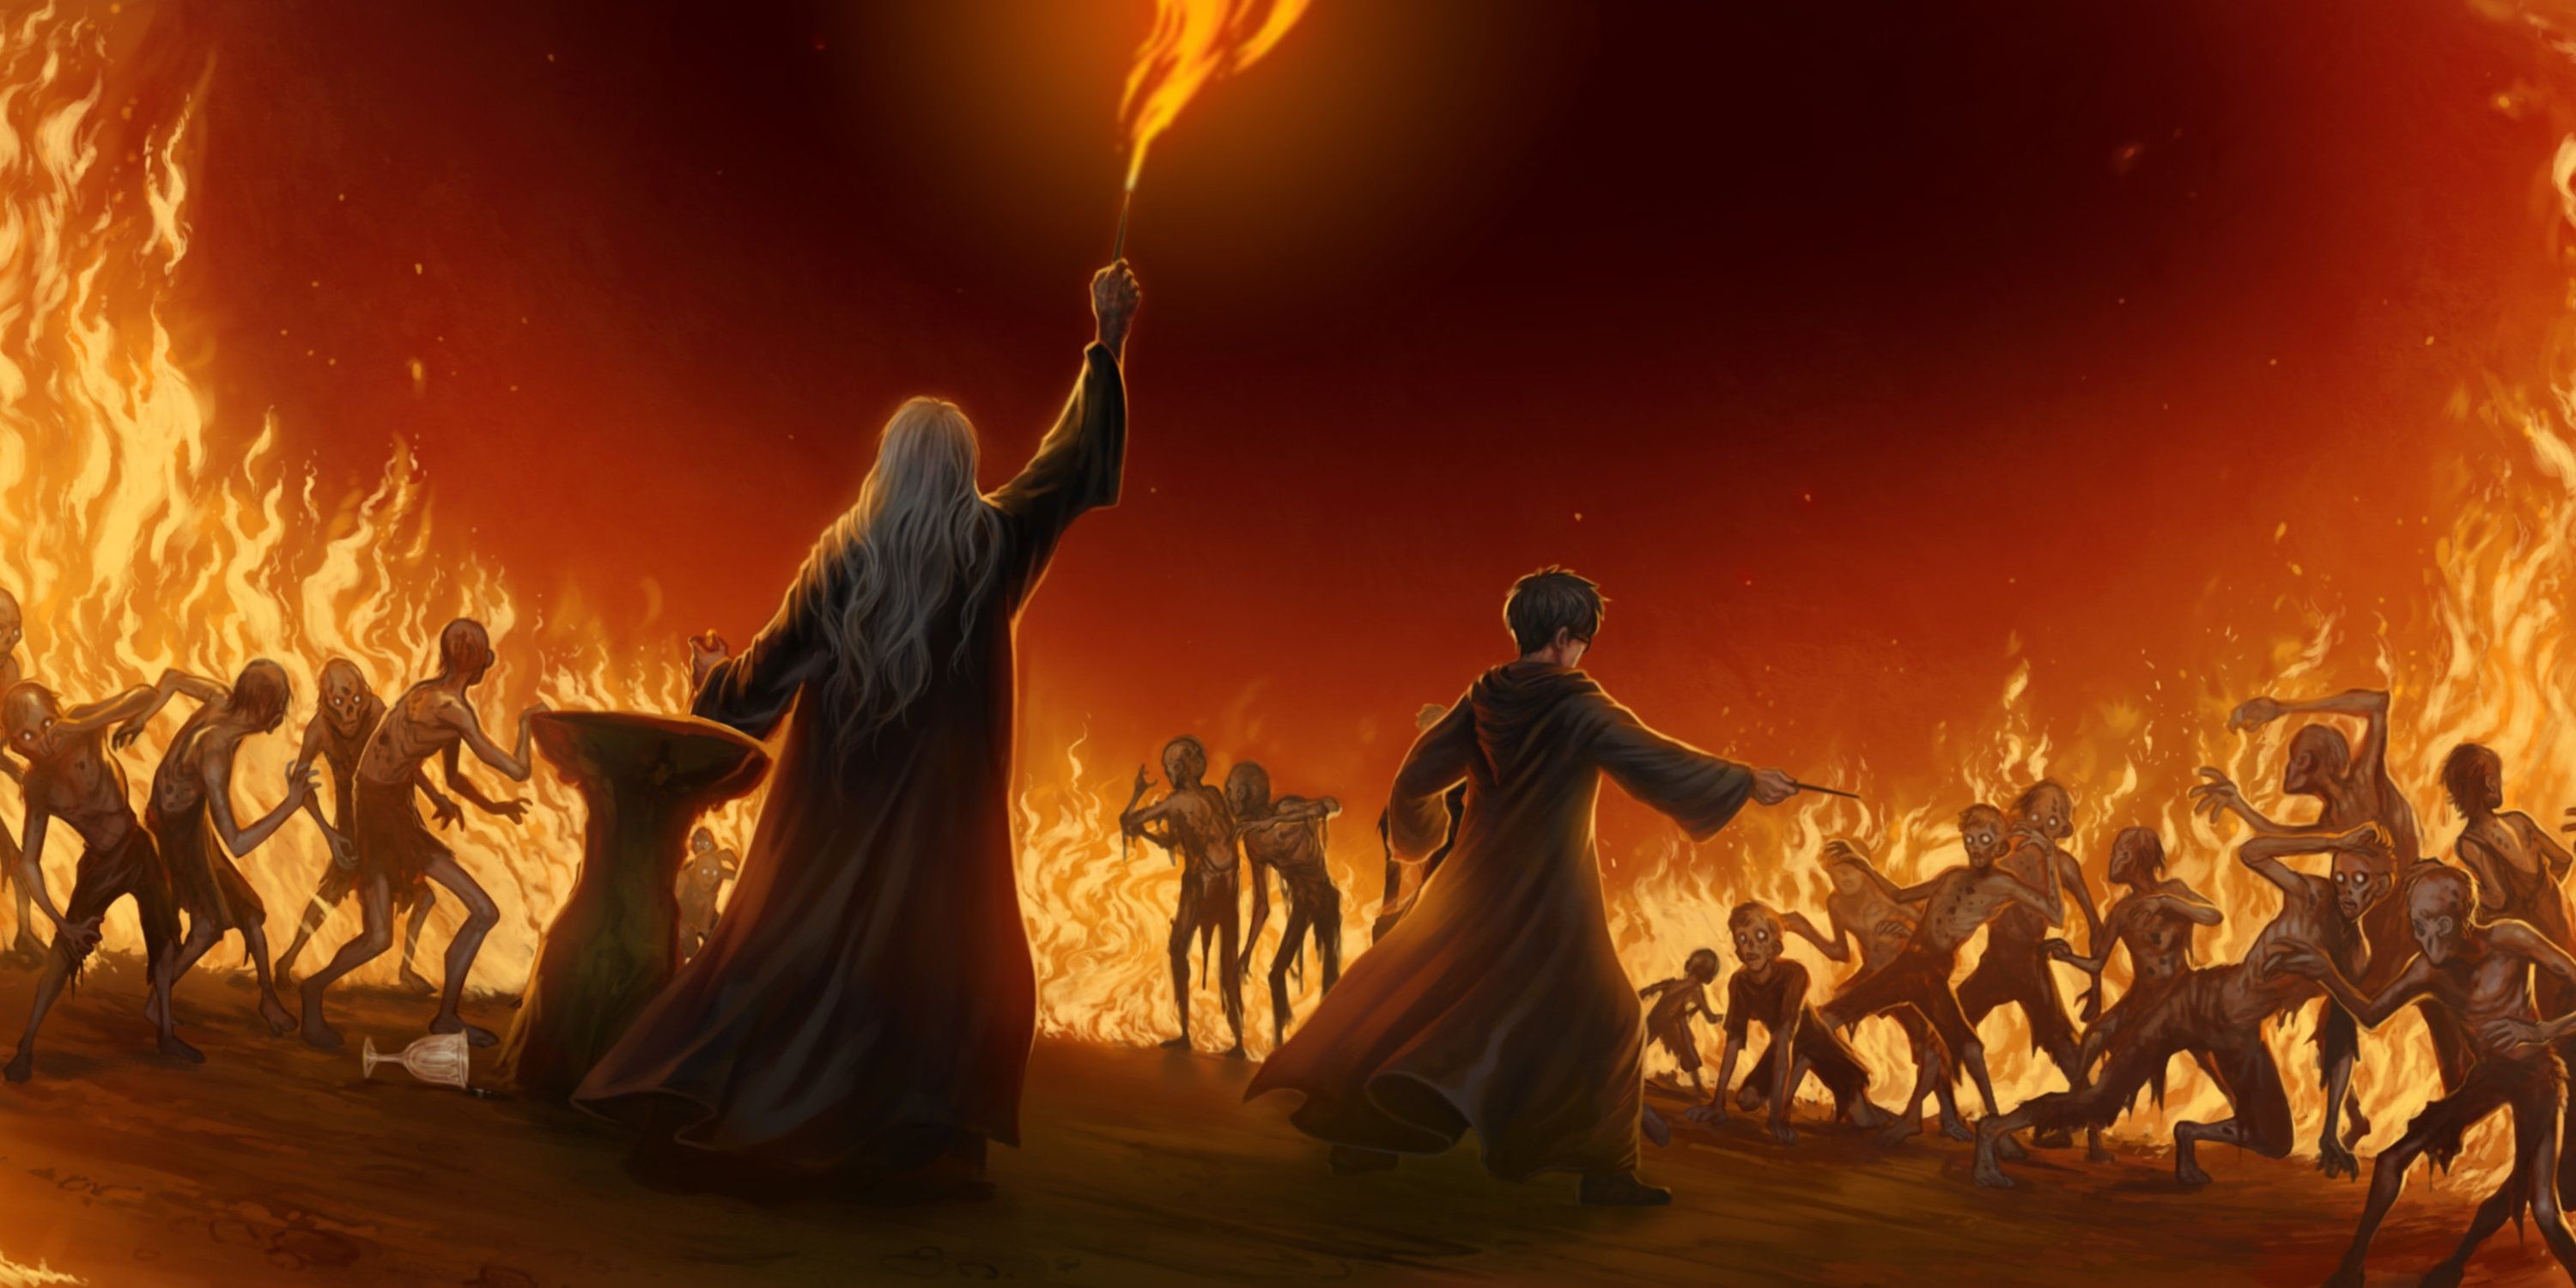 Dumbledore Casting Fire Spell on the Inferi in a Harry Potter illustration